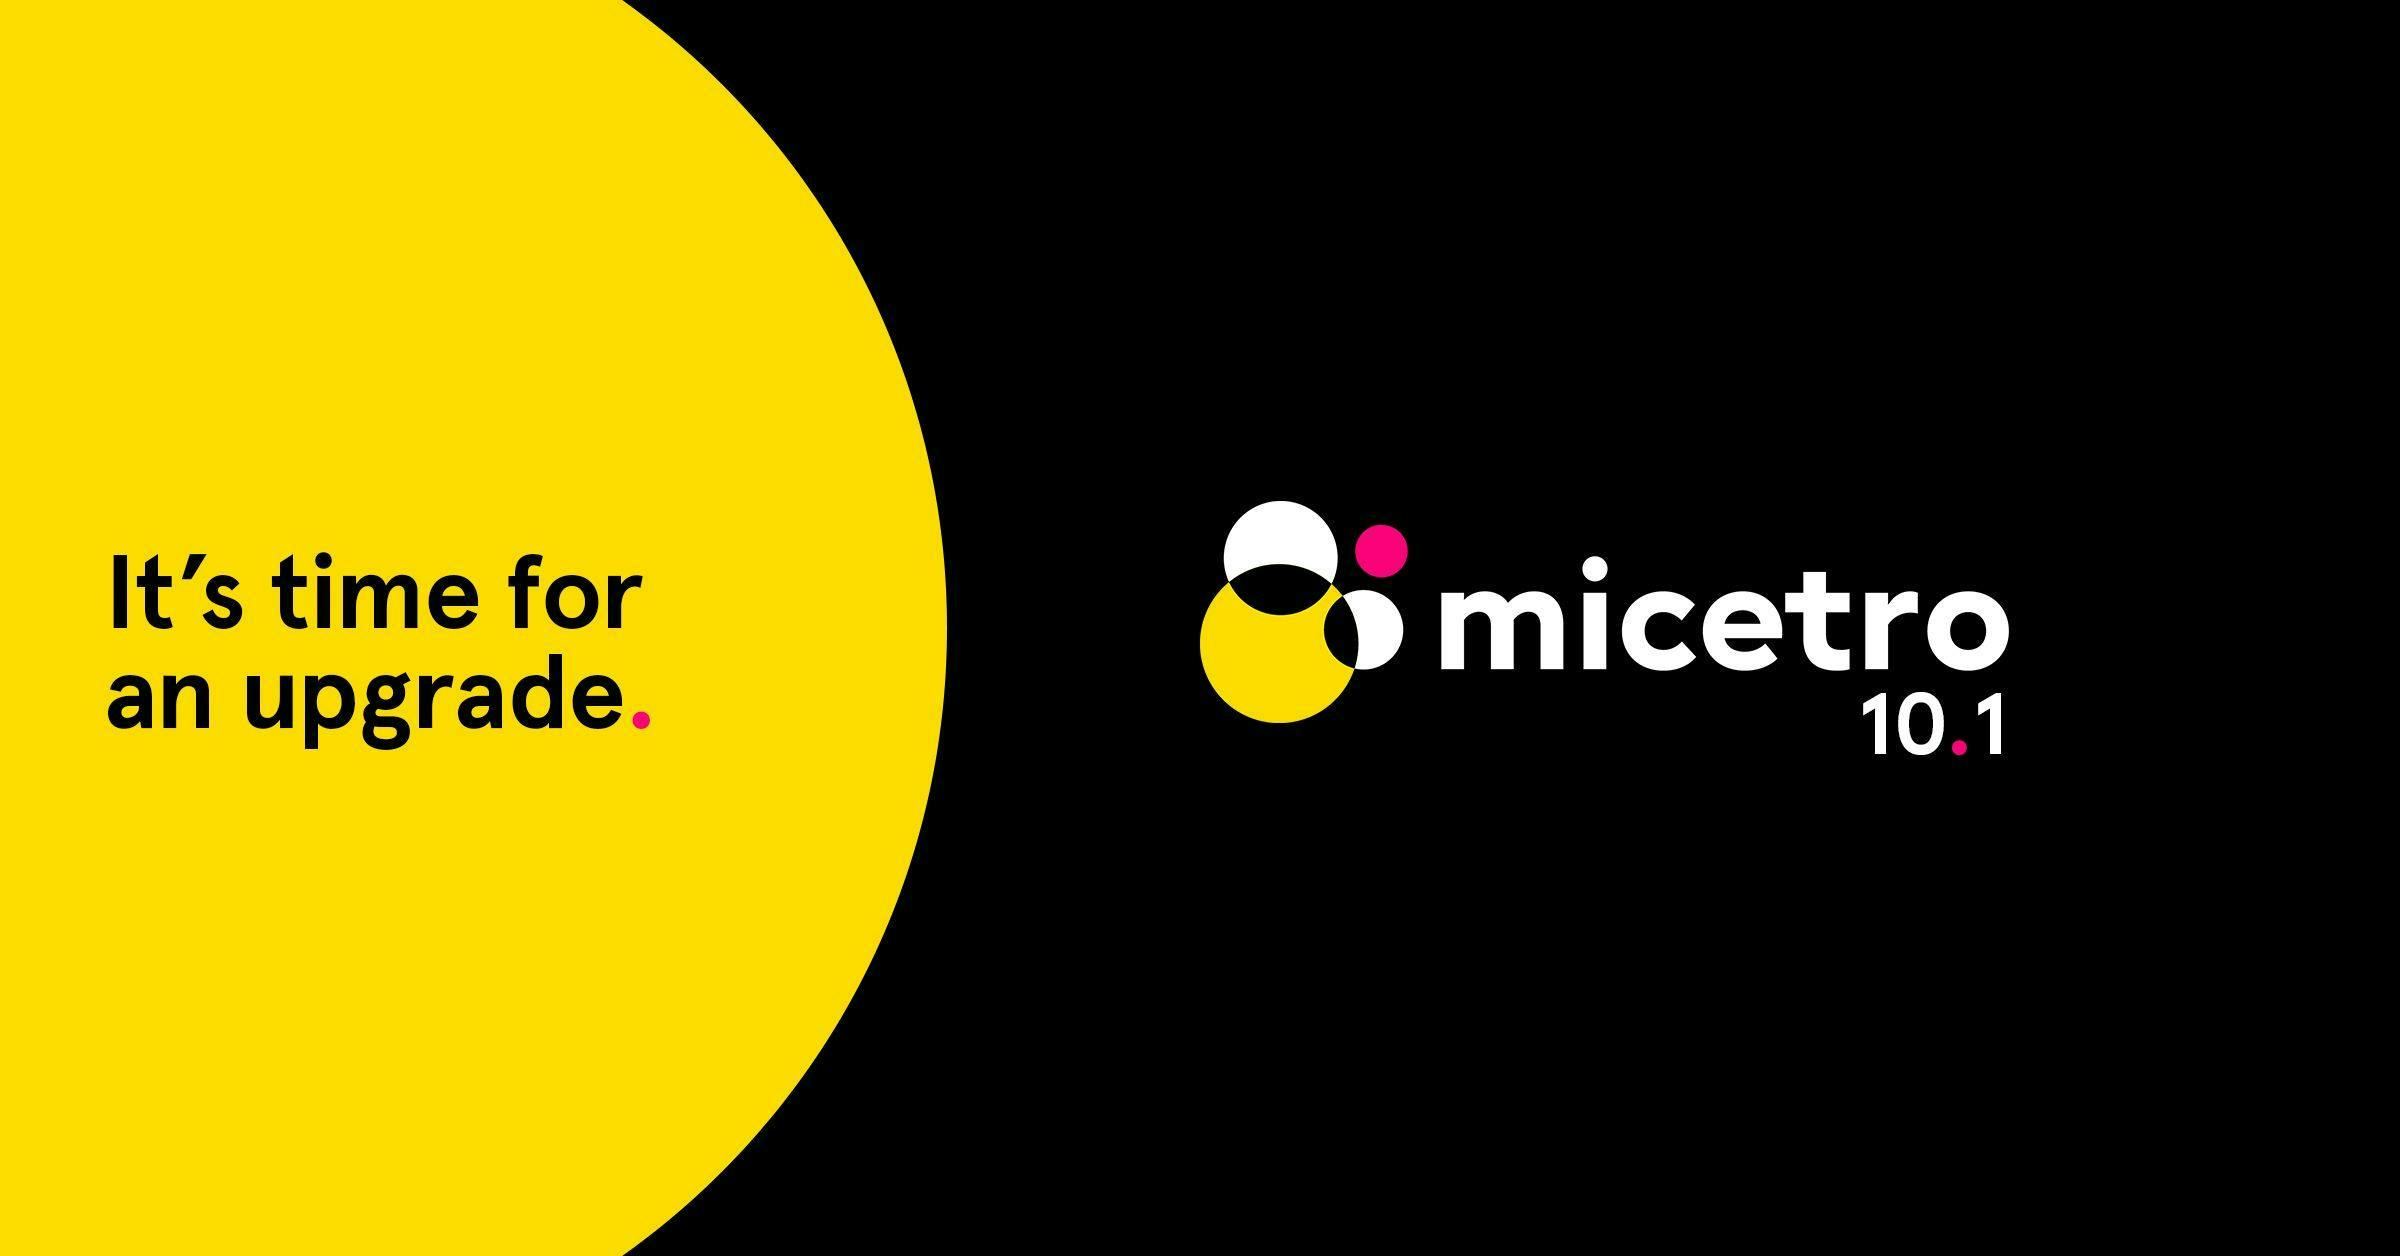 Men&Mice enhances sustainable networking with Micetro 10.1